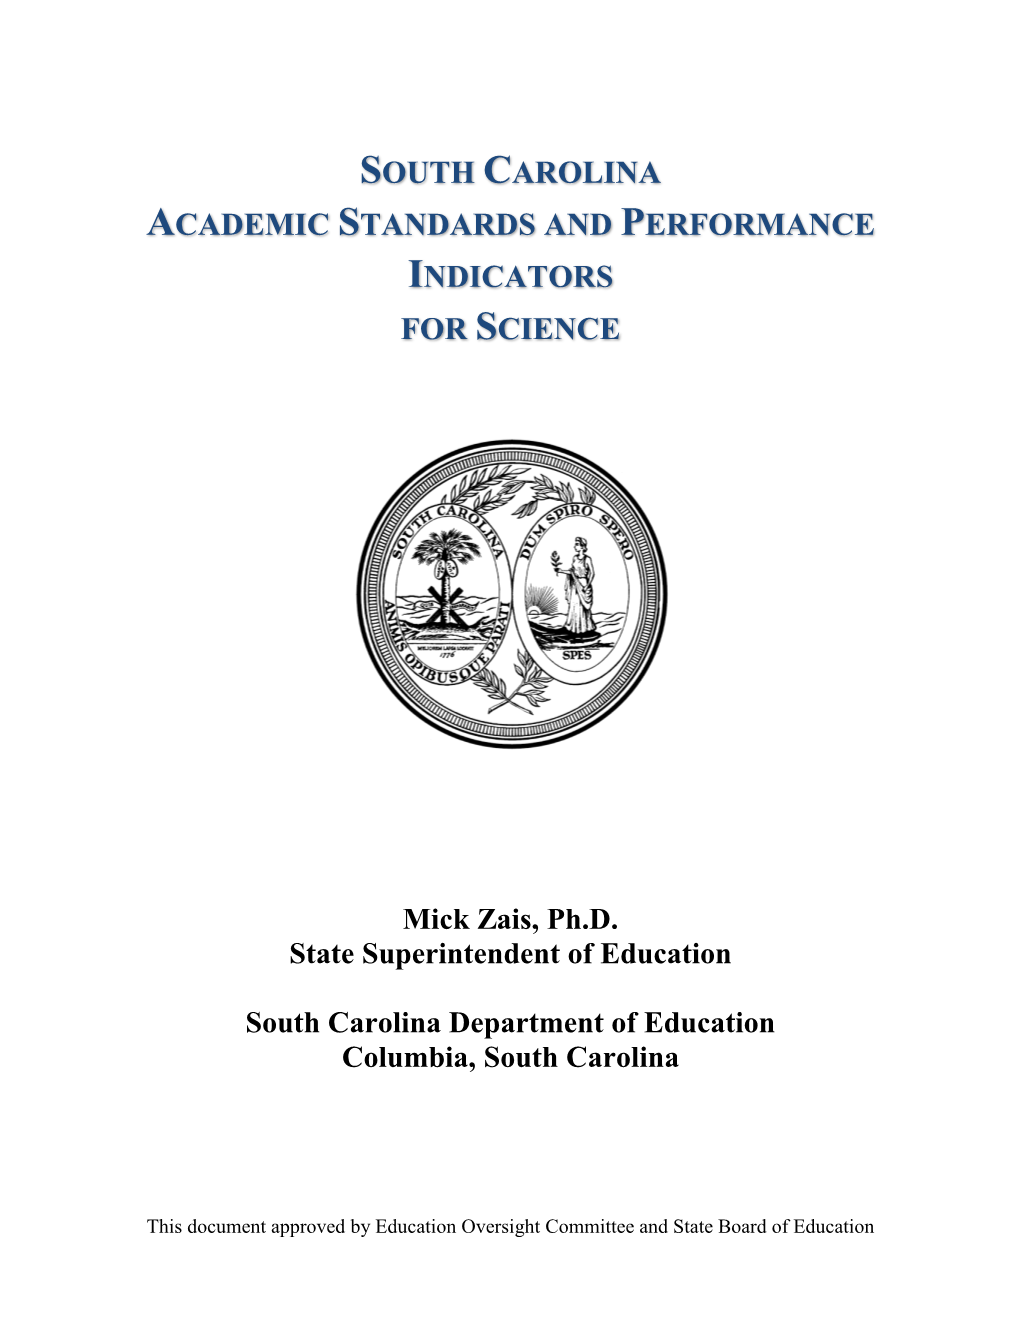 Science Academic Standards Over the Course of the Cyclical Review Process and Their Efforts and Input Are Appreciated